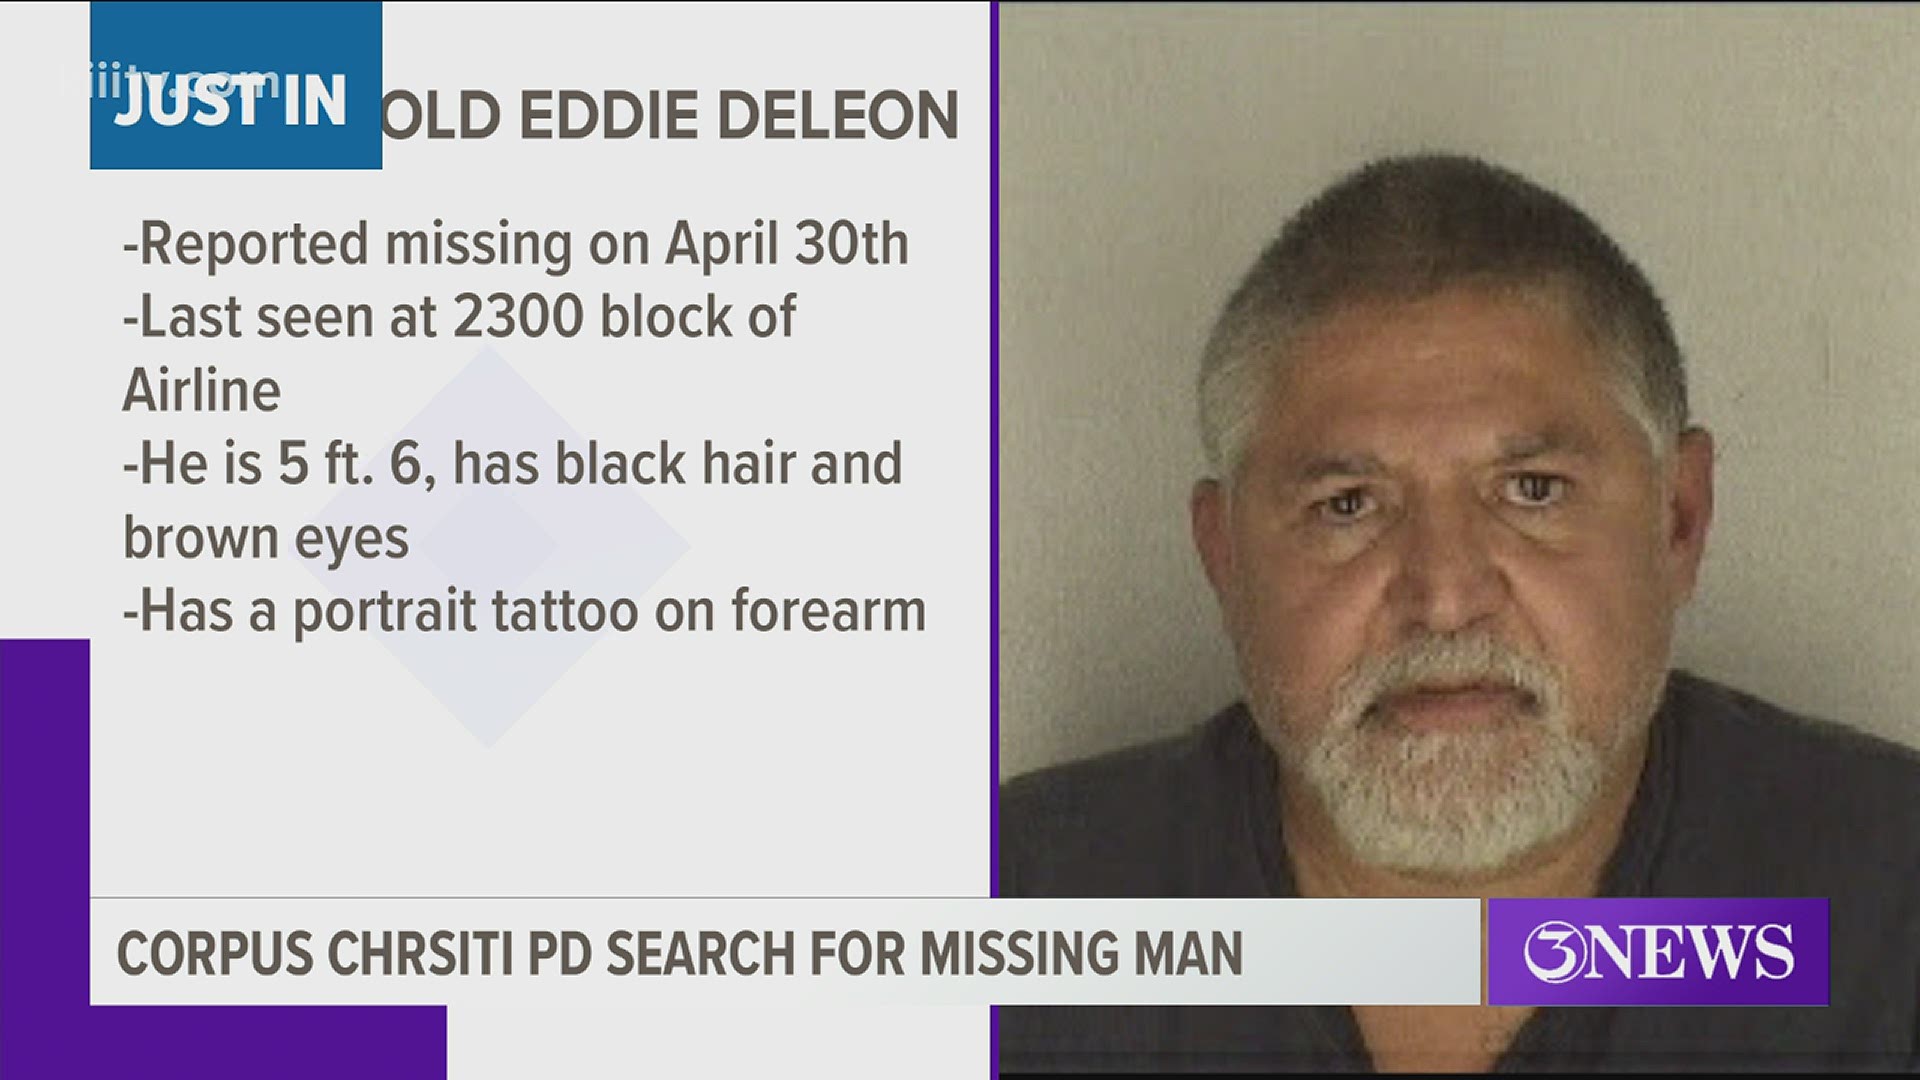 Eddie Deleon was reported missing by his family on April 30, 2021. He was last seen on the 2300 block of Airline.